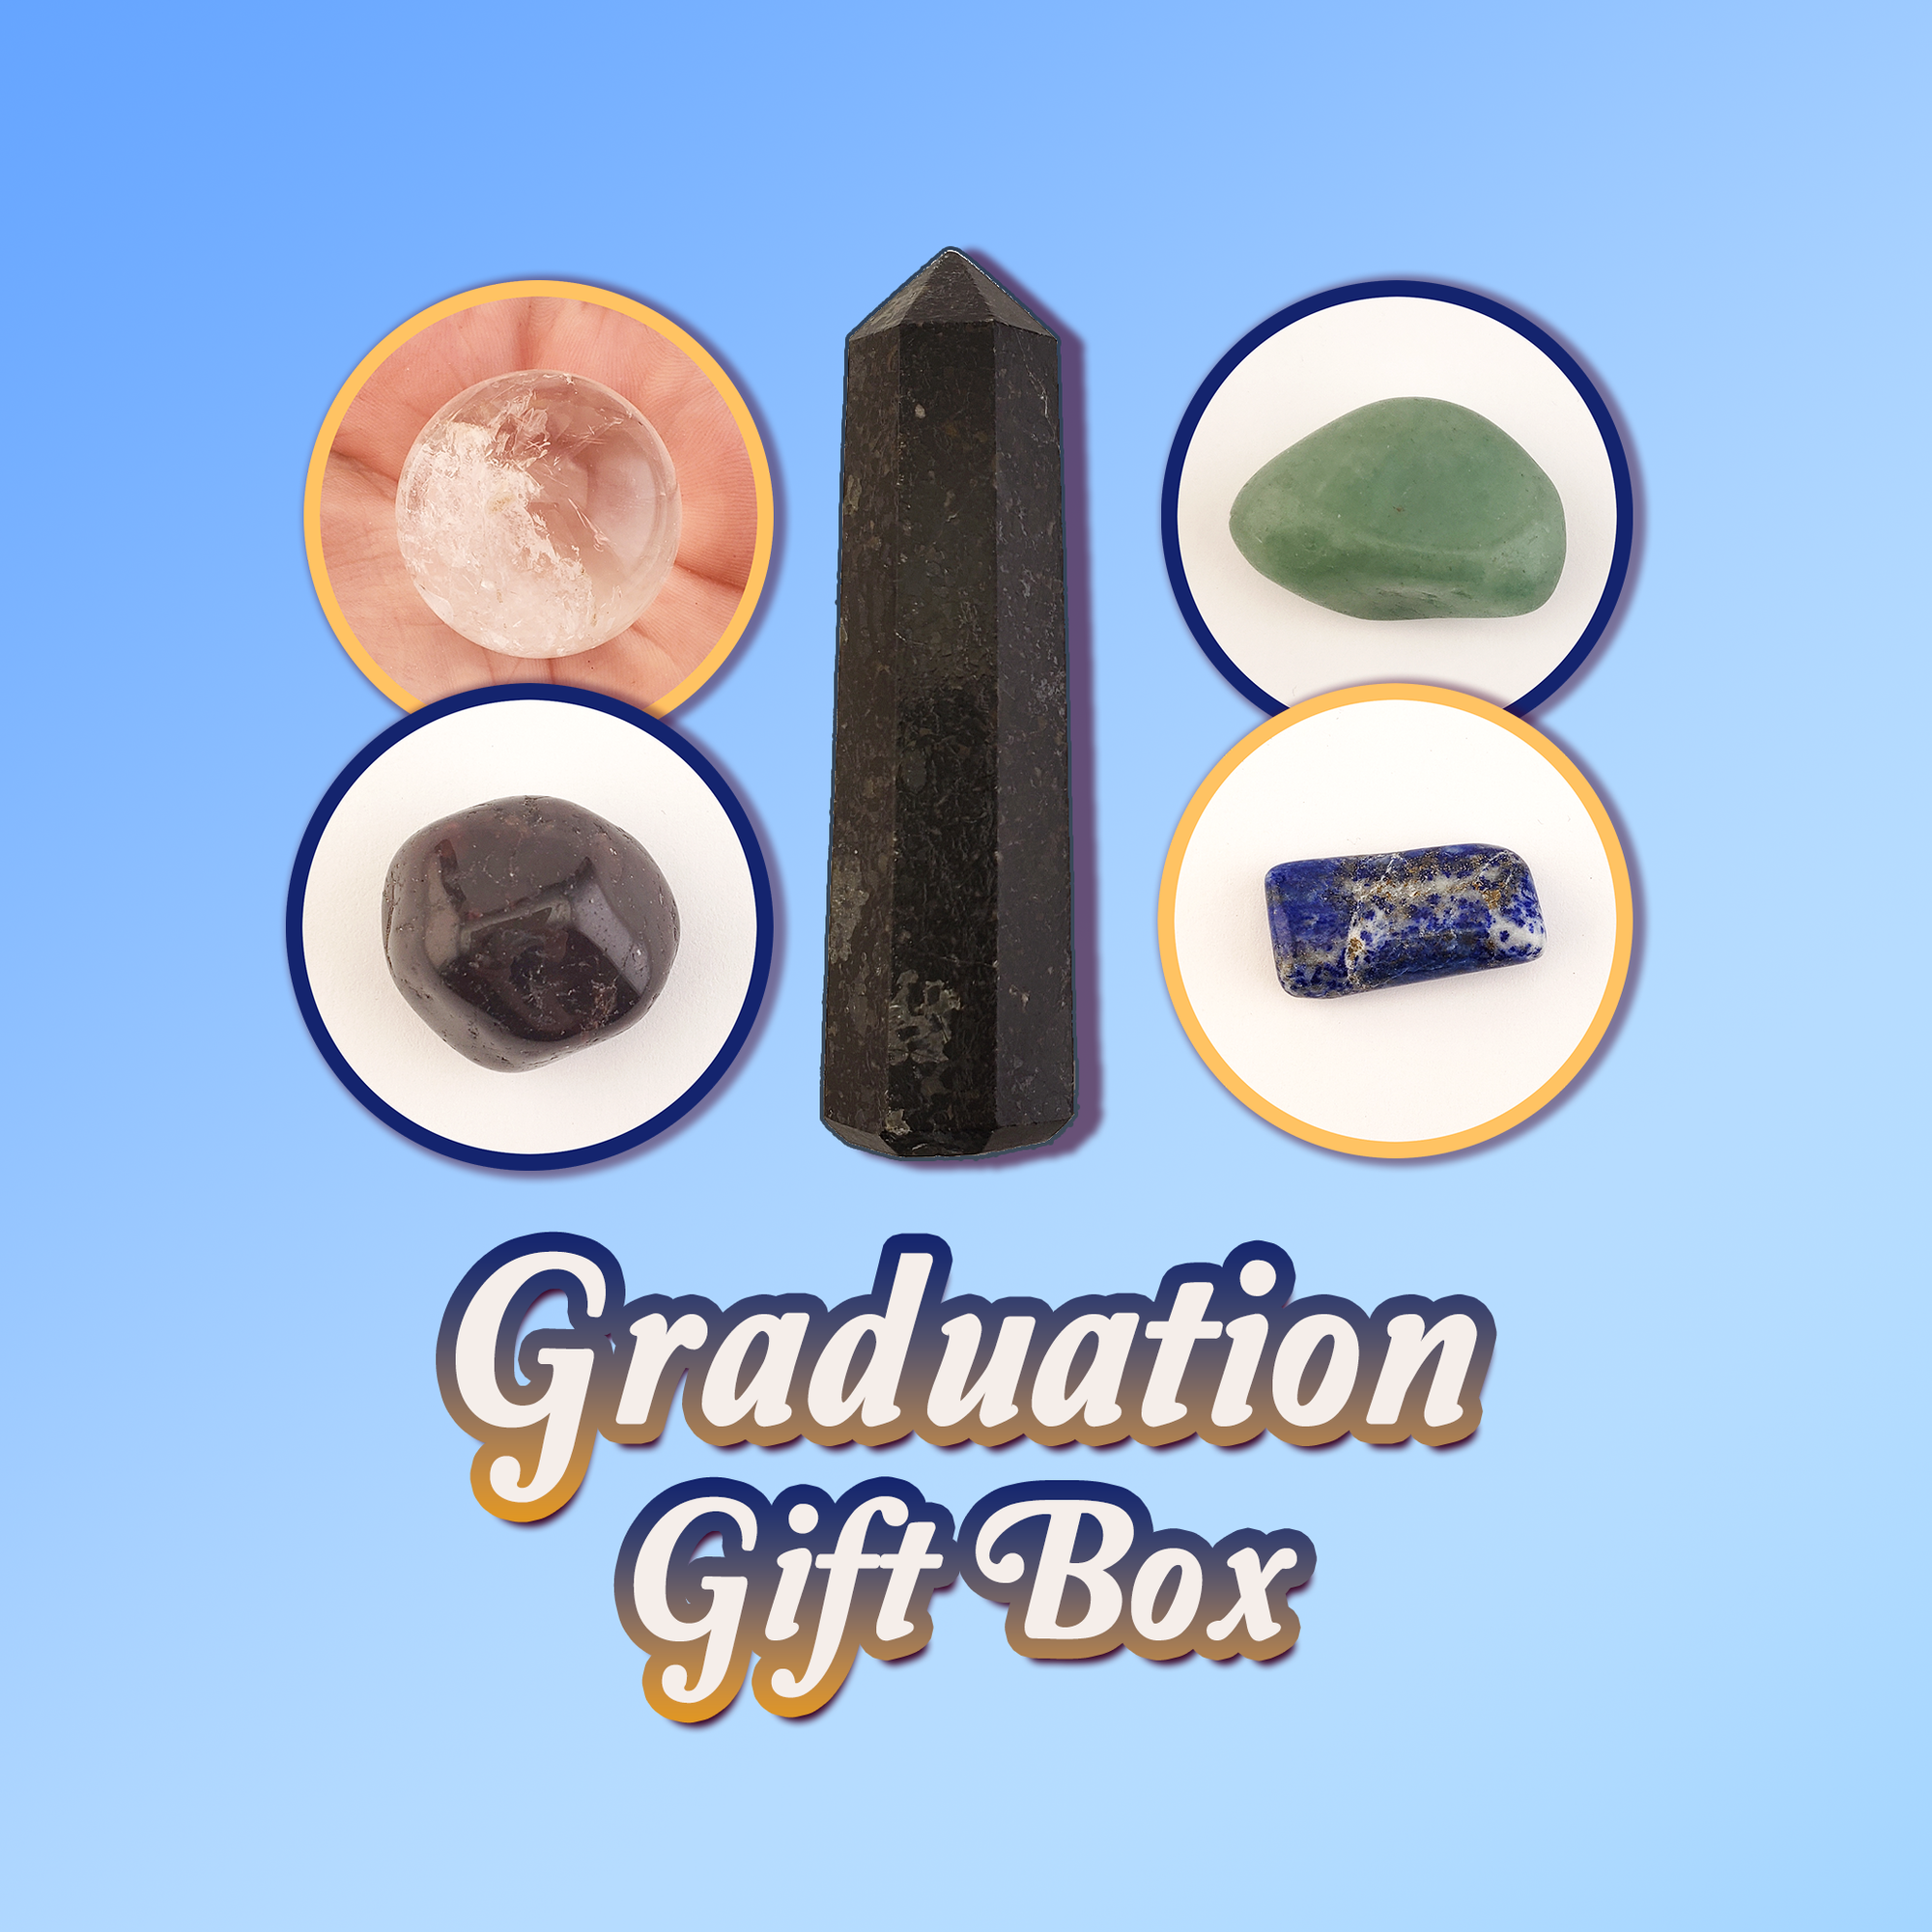 Graduation Gift Box - Crystals For Successful New Beginnings